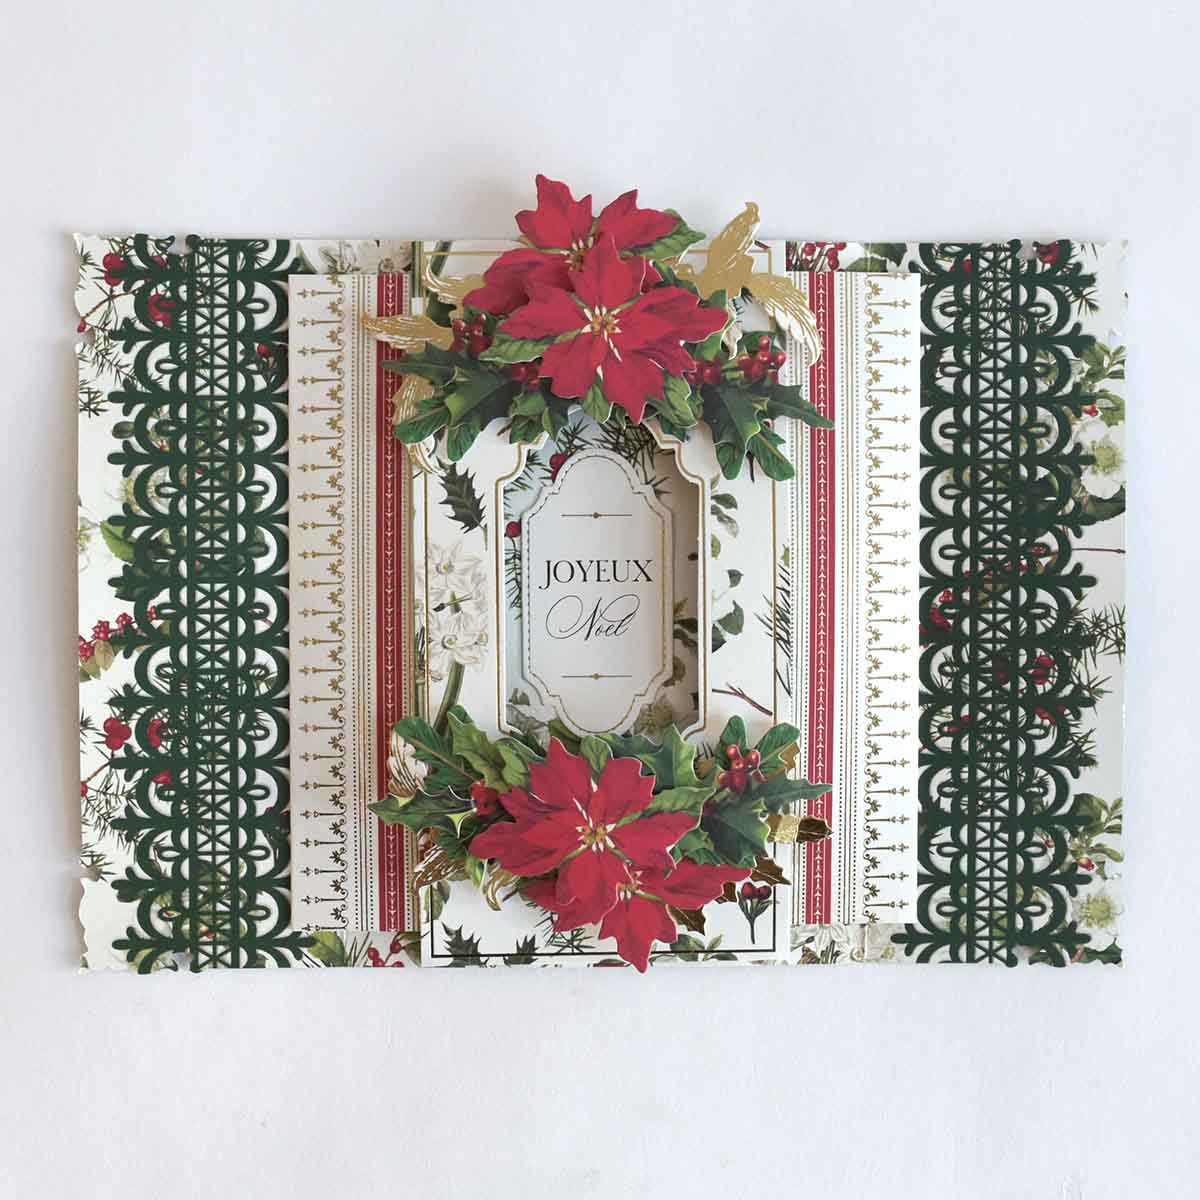 a christmas card with poinsettis and ribbons.